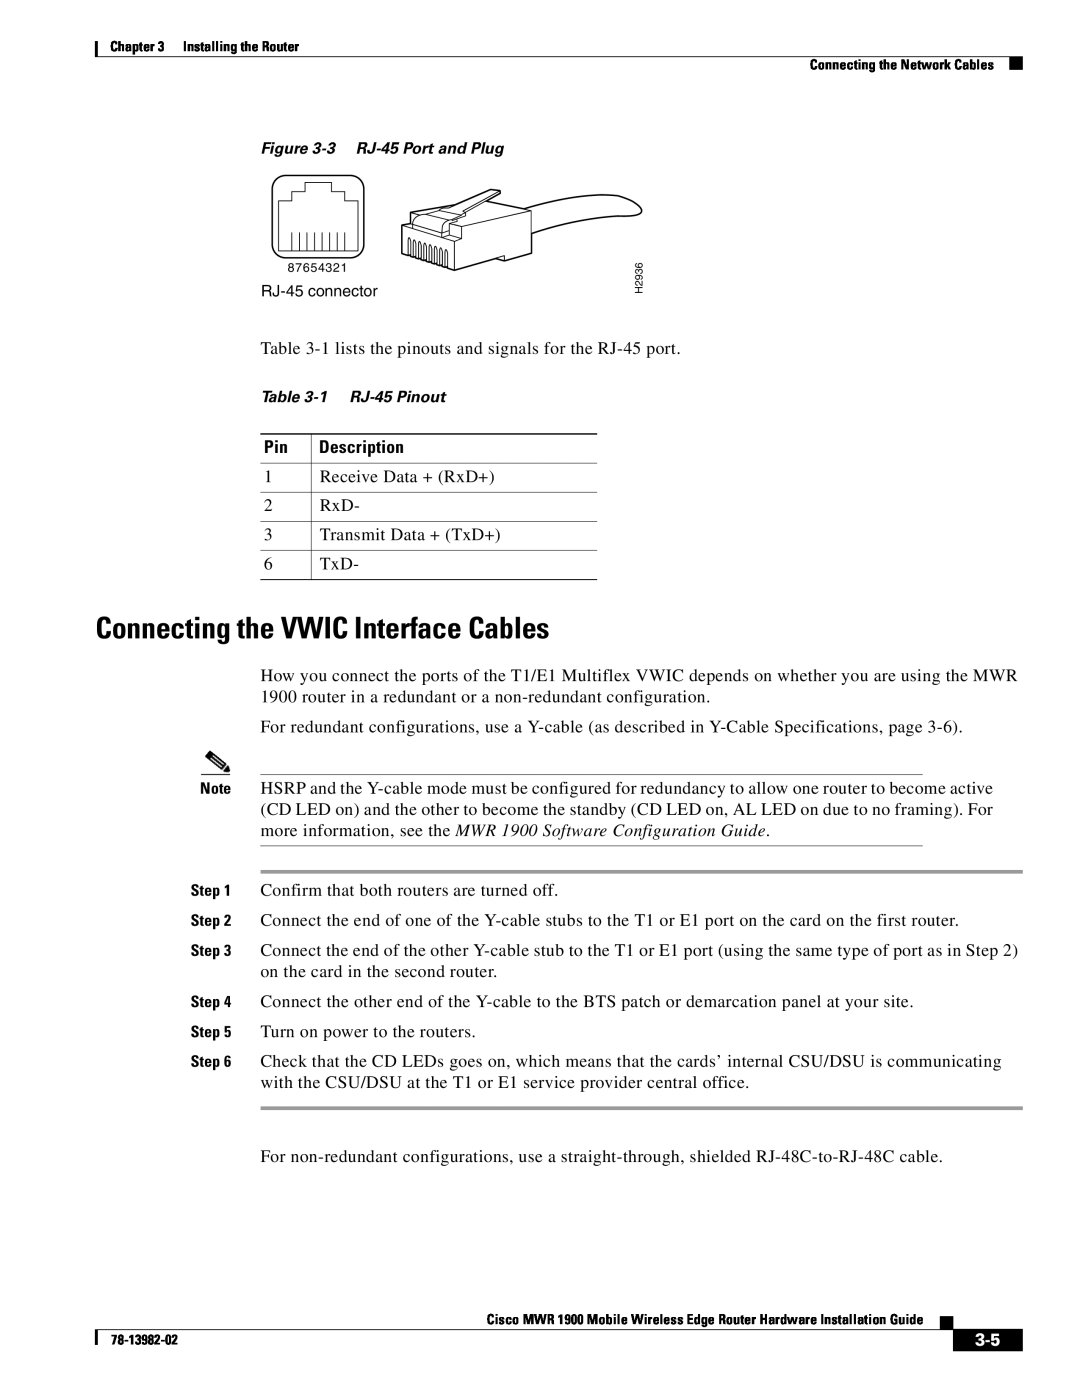 Cisco Systems MWR 1900 manual Connecting the VWIC Interface Cables 